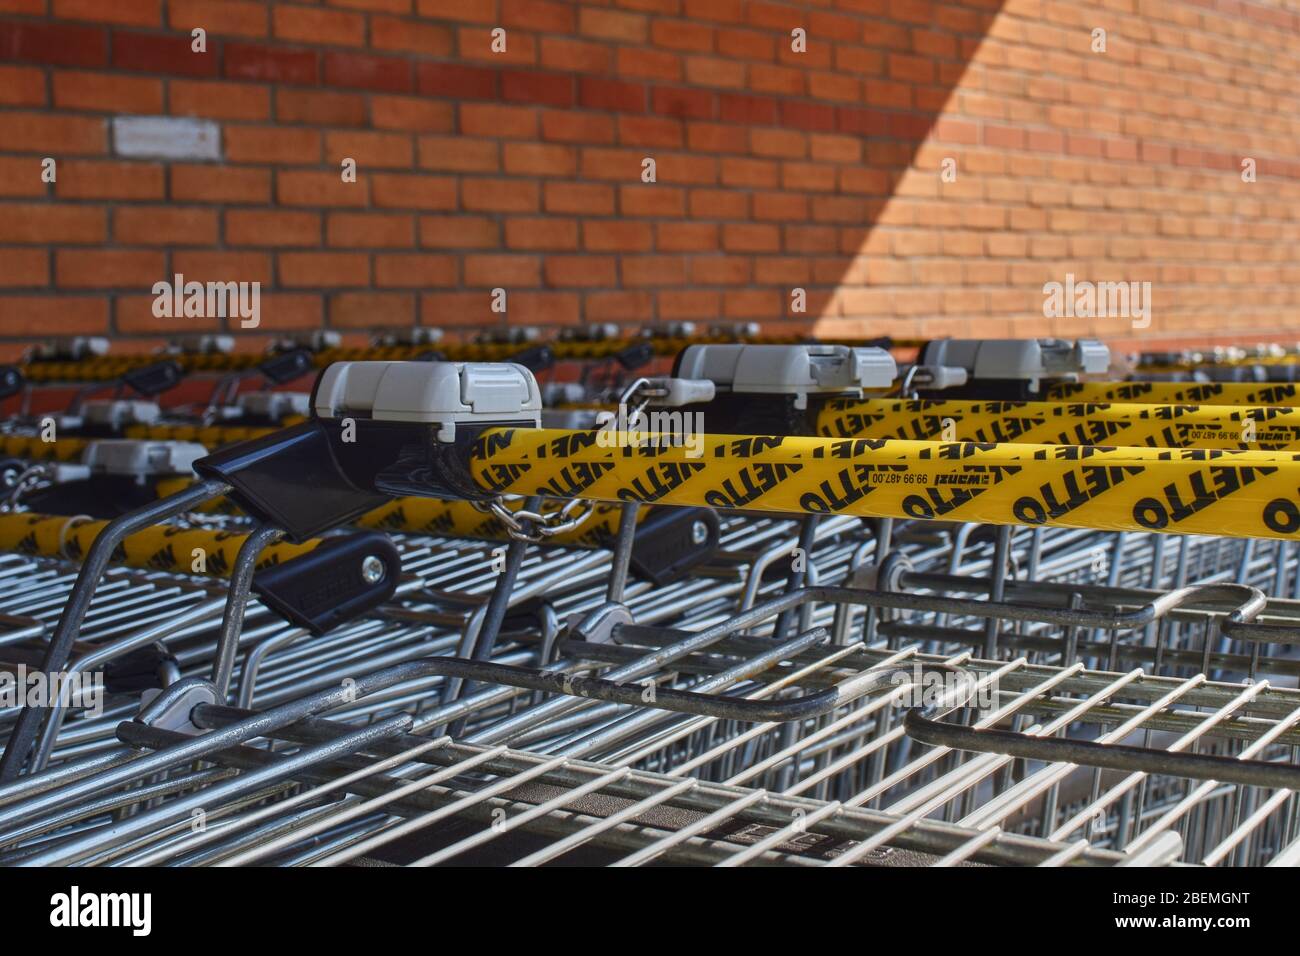 Berlin, Germany - April 02, 2018: A row of shopping trolleys with focus on the handles and locks that can be unlocked with a coin to borrow one of the Stock Photo